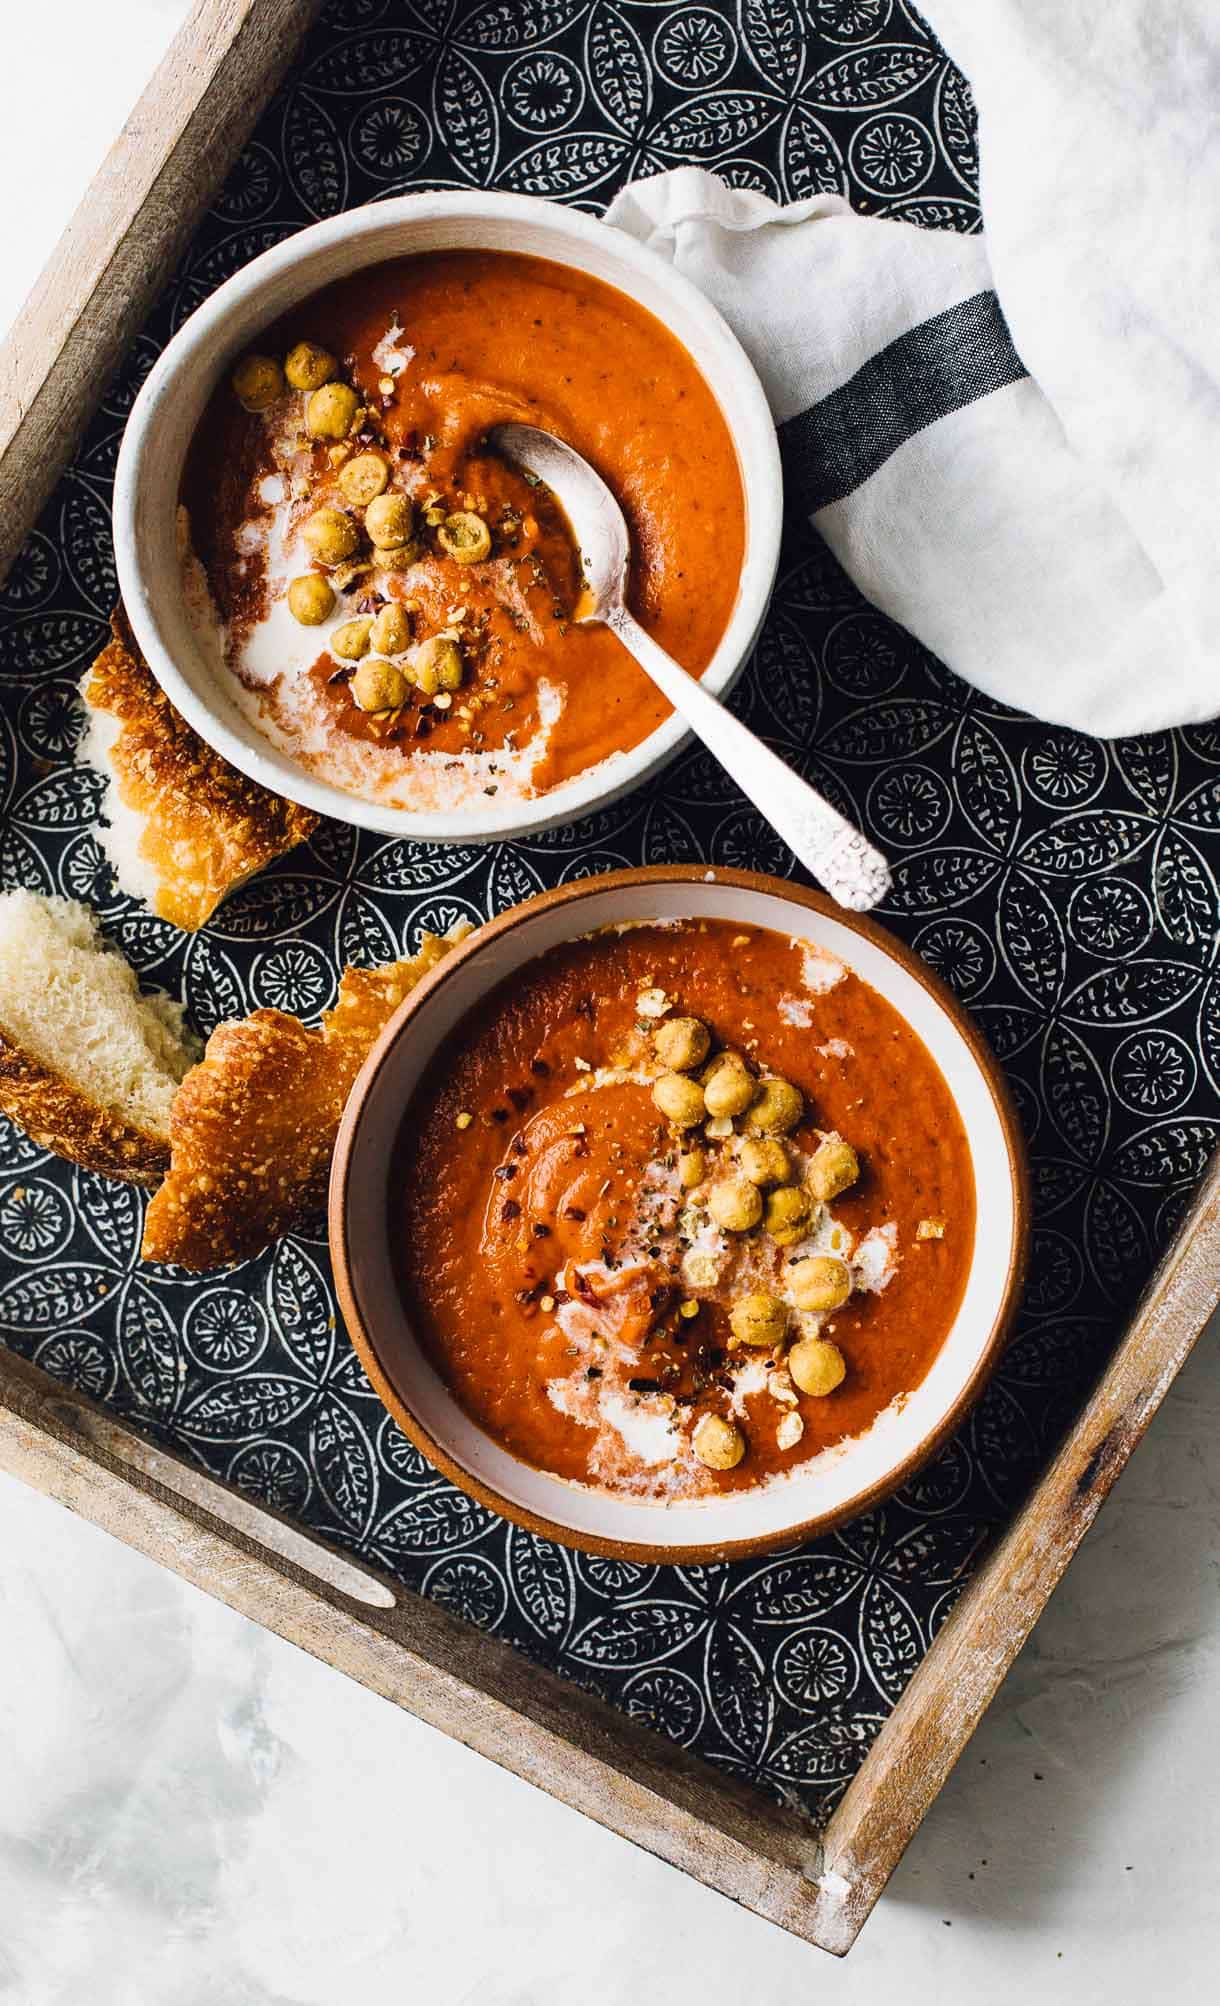 Tomato Bisque with Crunchy Chickpeas